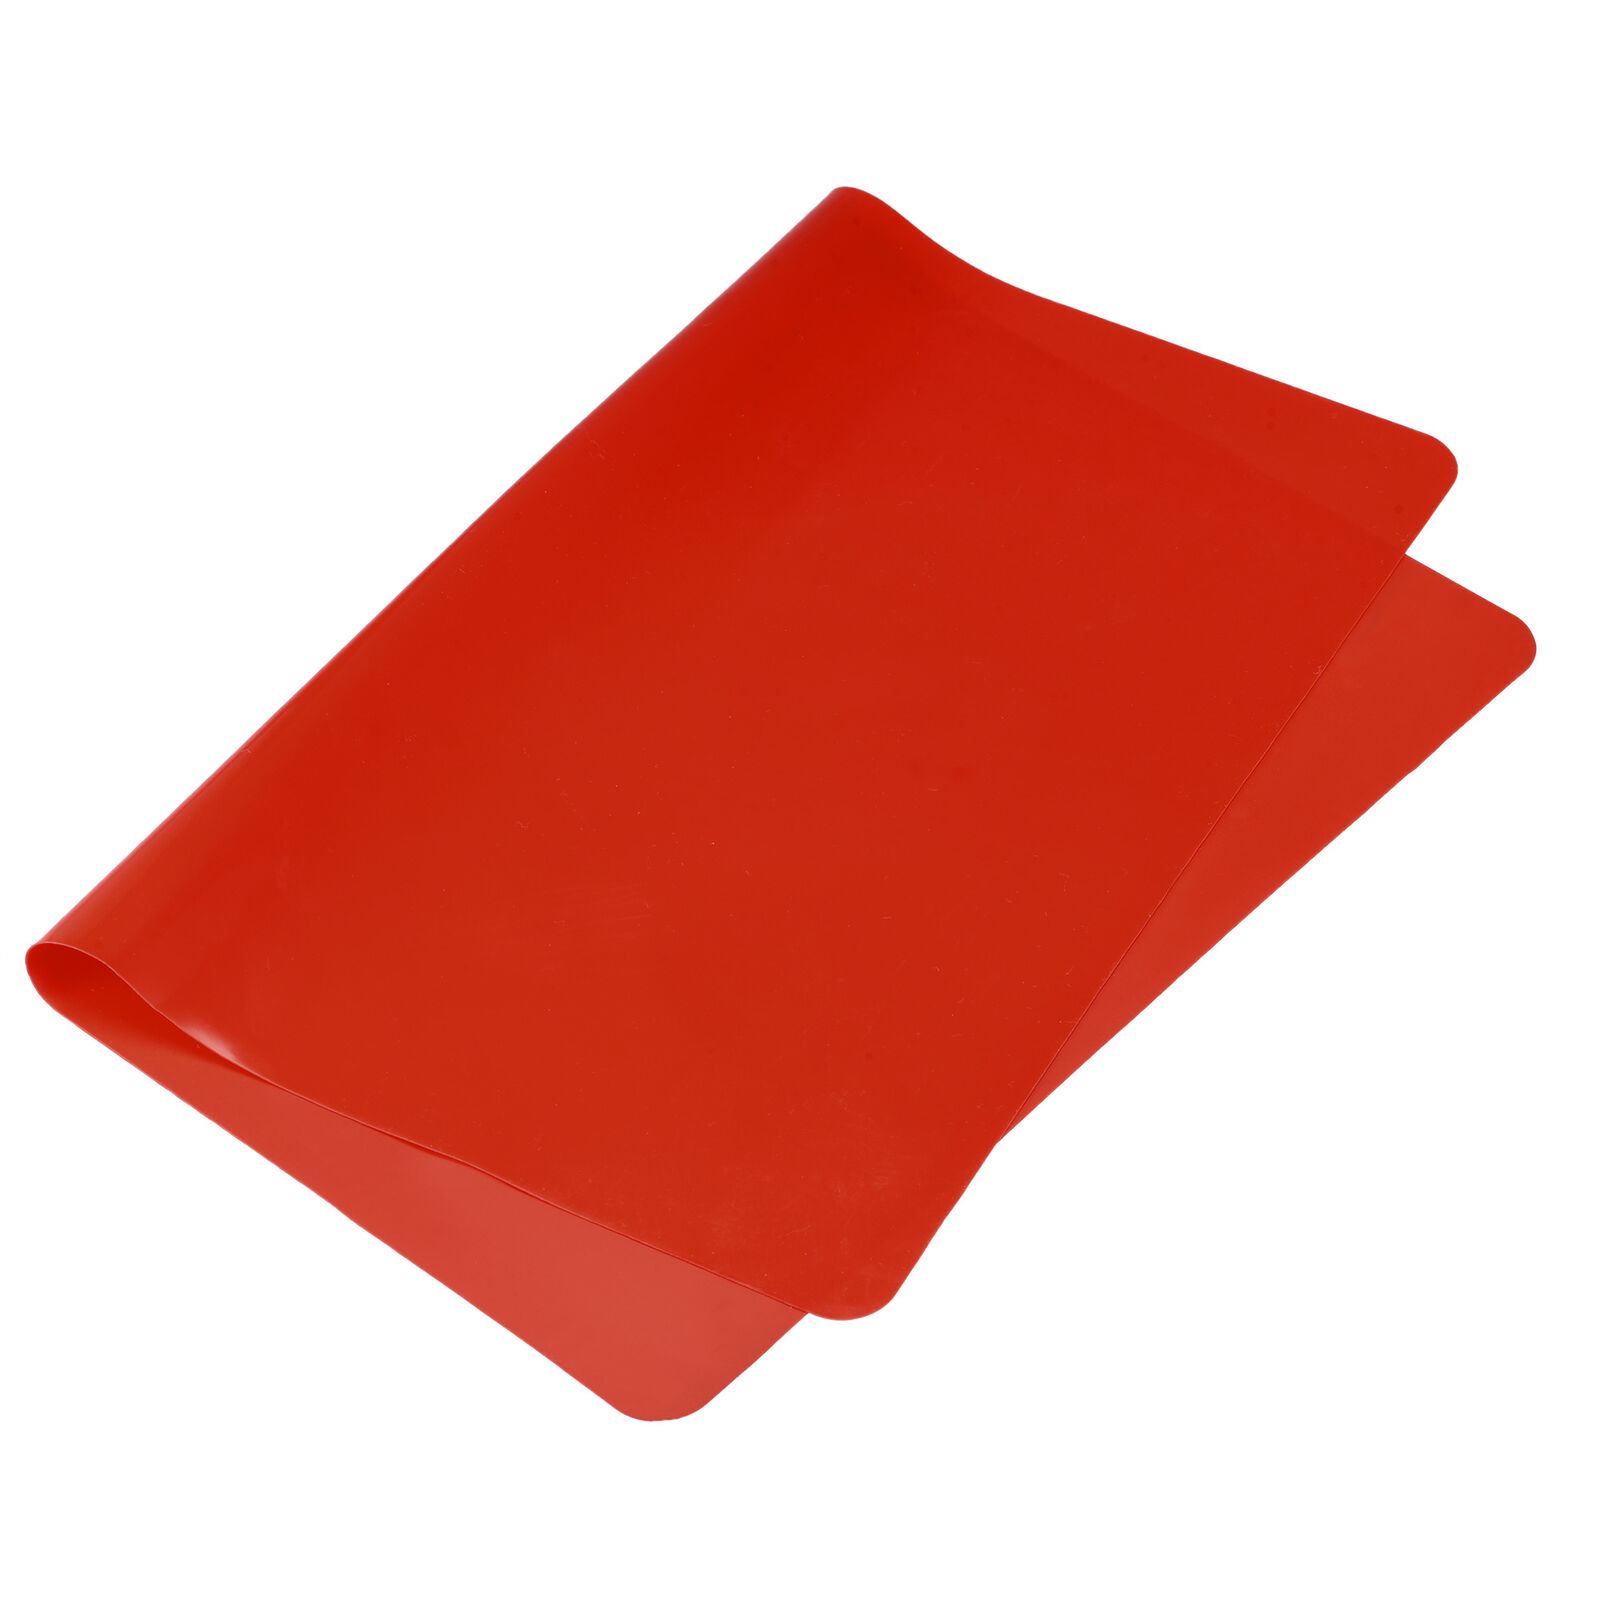 Silicone Mat 15.75" X 11.81" Sheet For Craft Diy Non-slip Red 2pcs